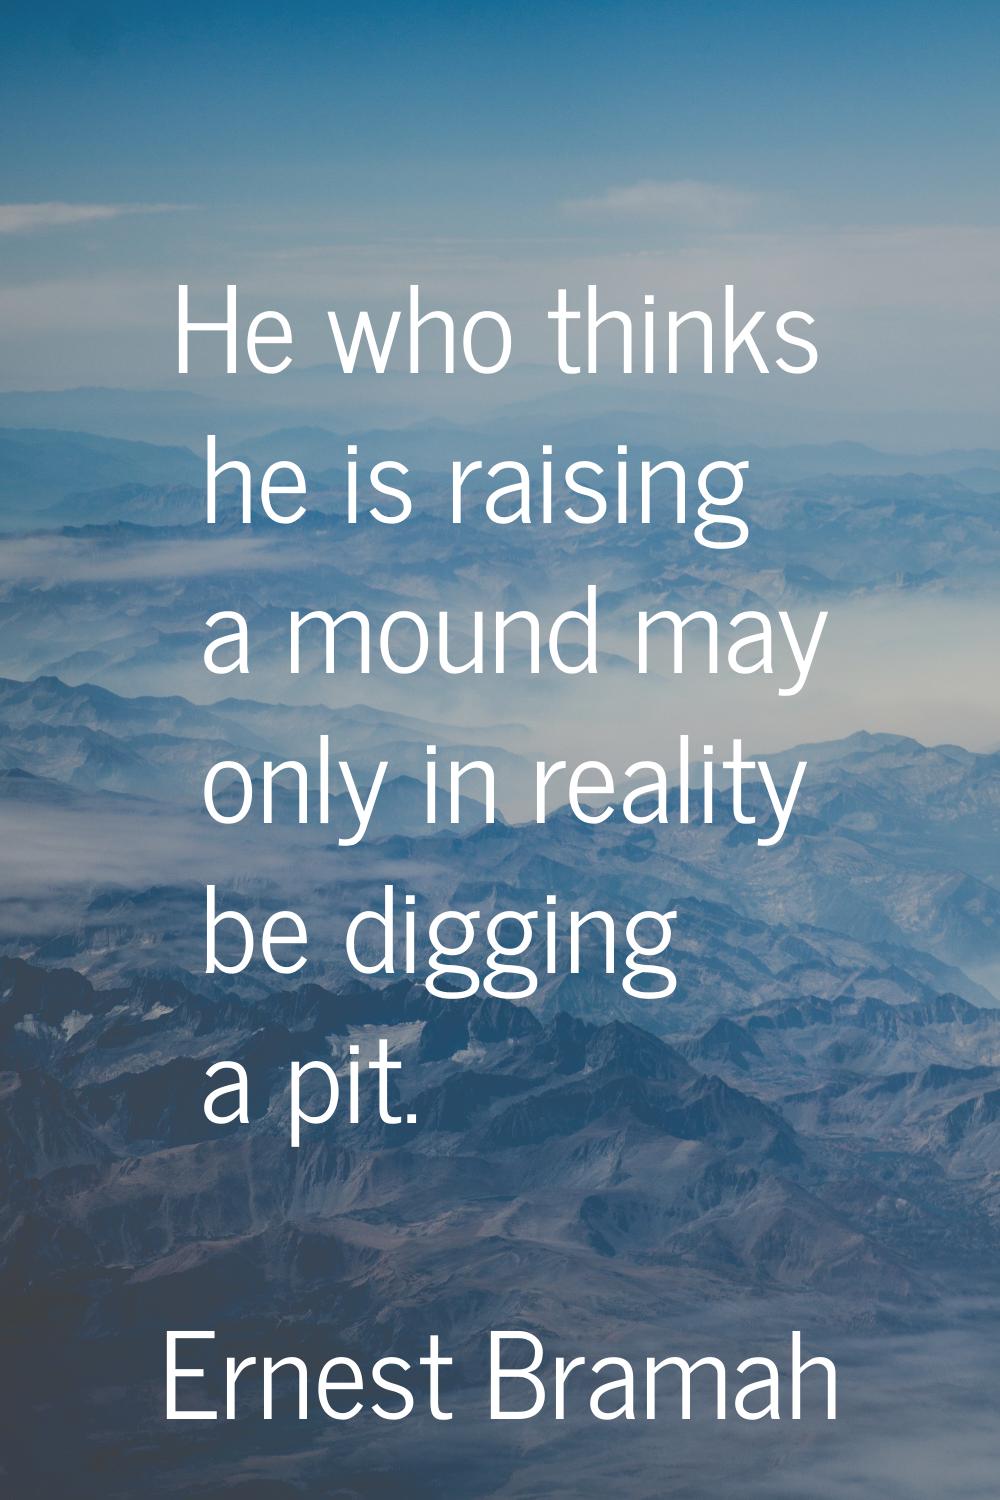 He who thinks he is raising a mound may only in reality be digging a pit.